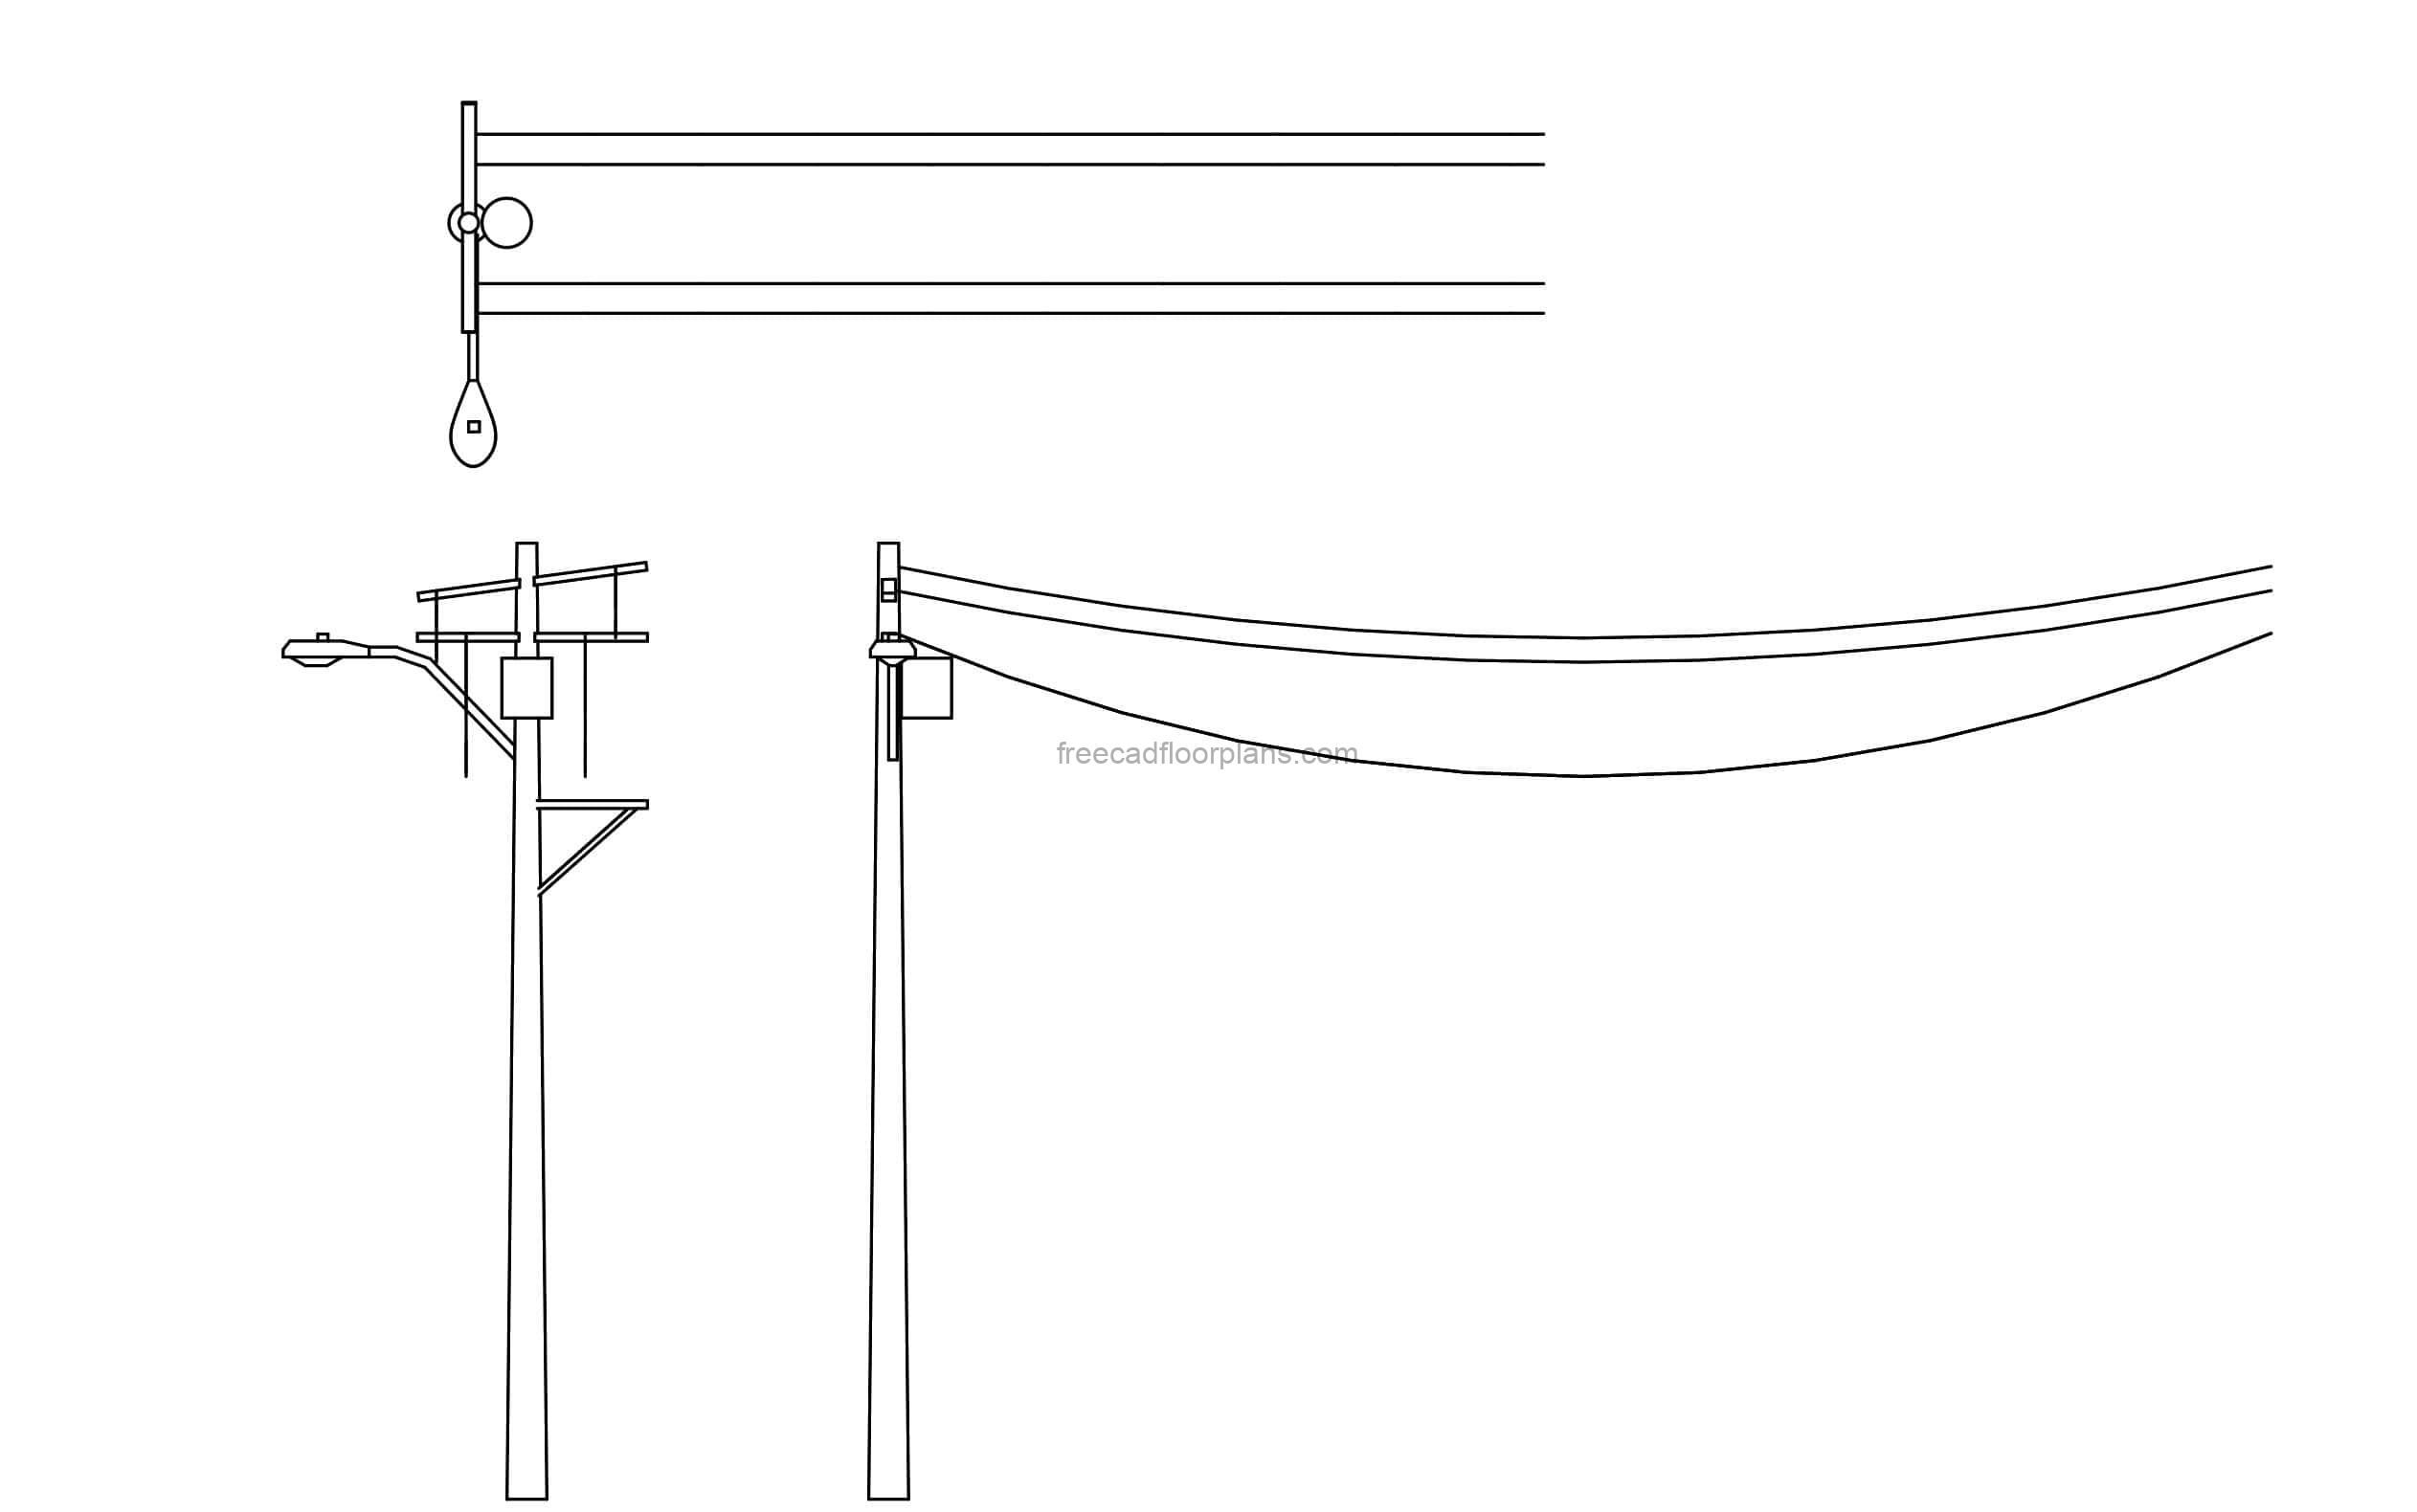 electrical post dwg drawing all 2d views for free download